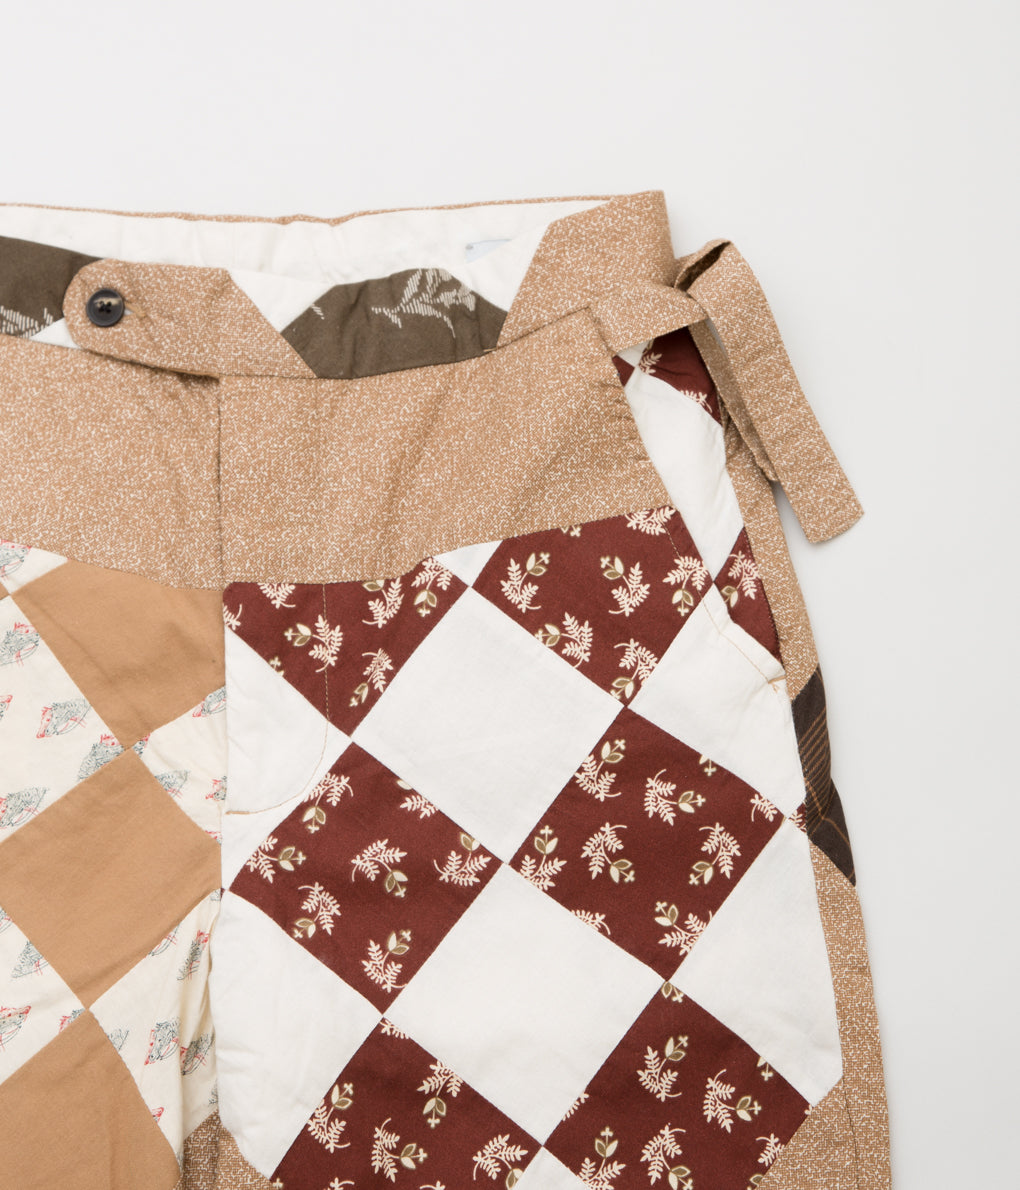 BODE "PONY CALICO QUILT TROUSERS"(BROWN MULTI)